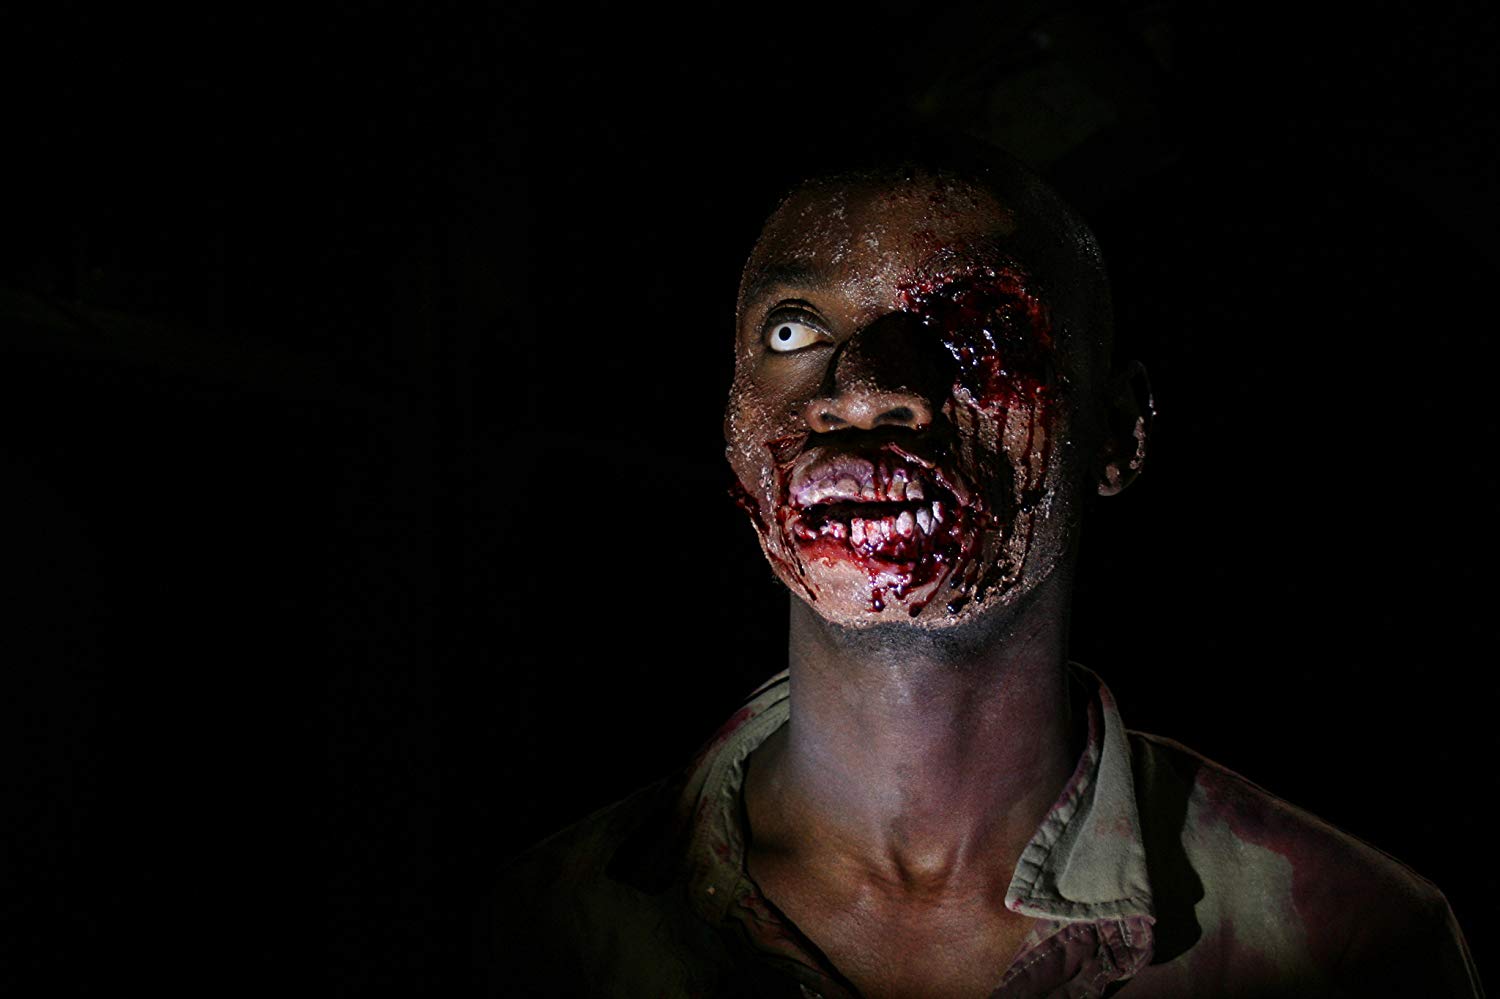 Zombies overrun Africa in The Dead (2010)